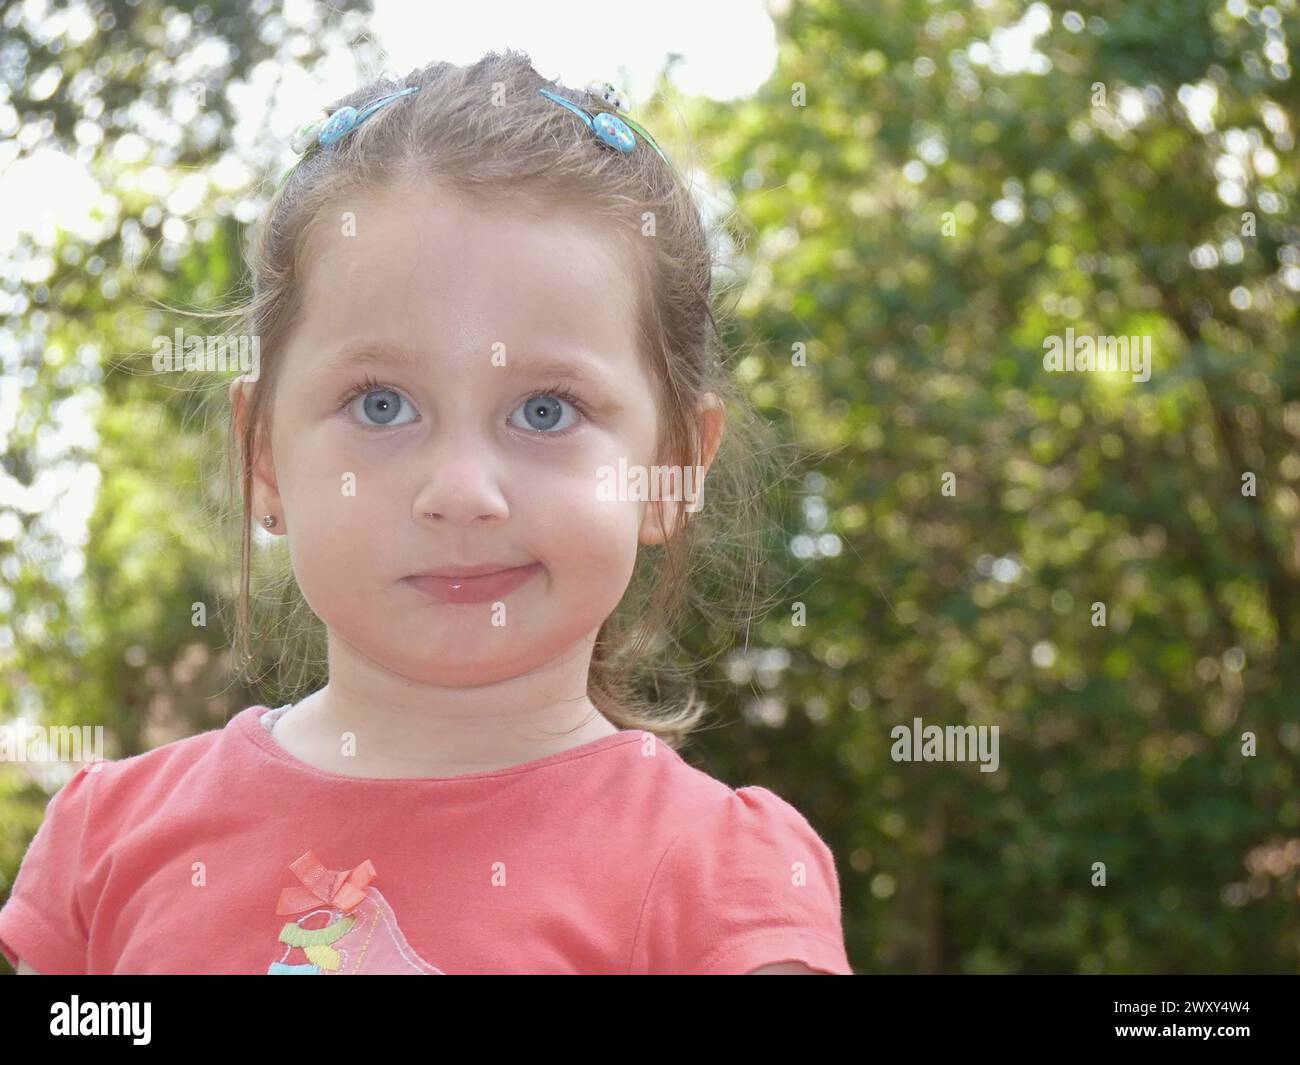 blue-eyed girl with a pretty face smiling Stock Photo